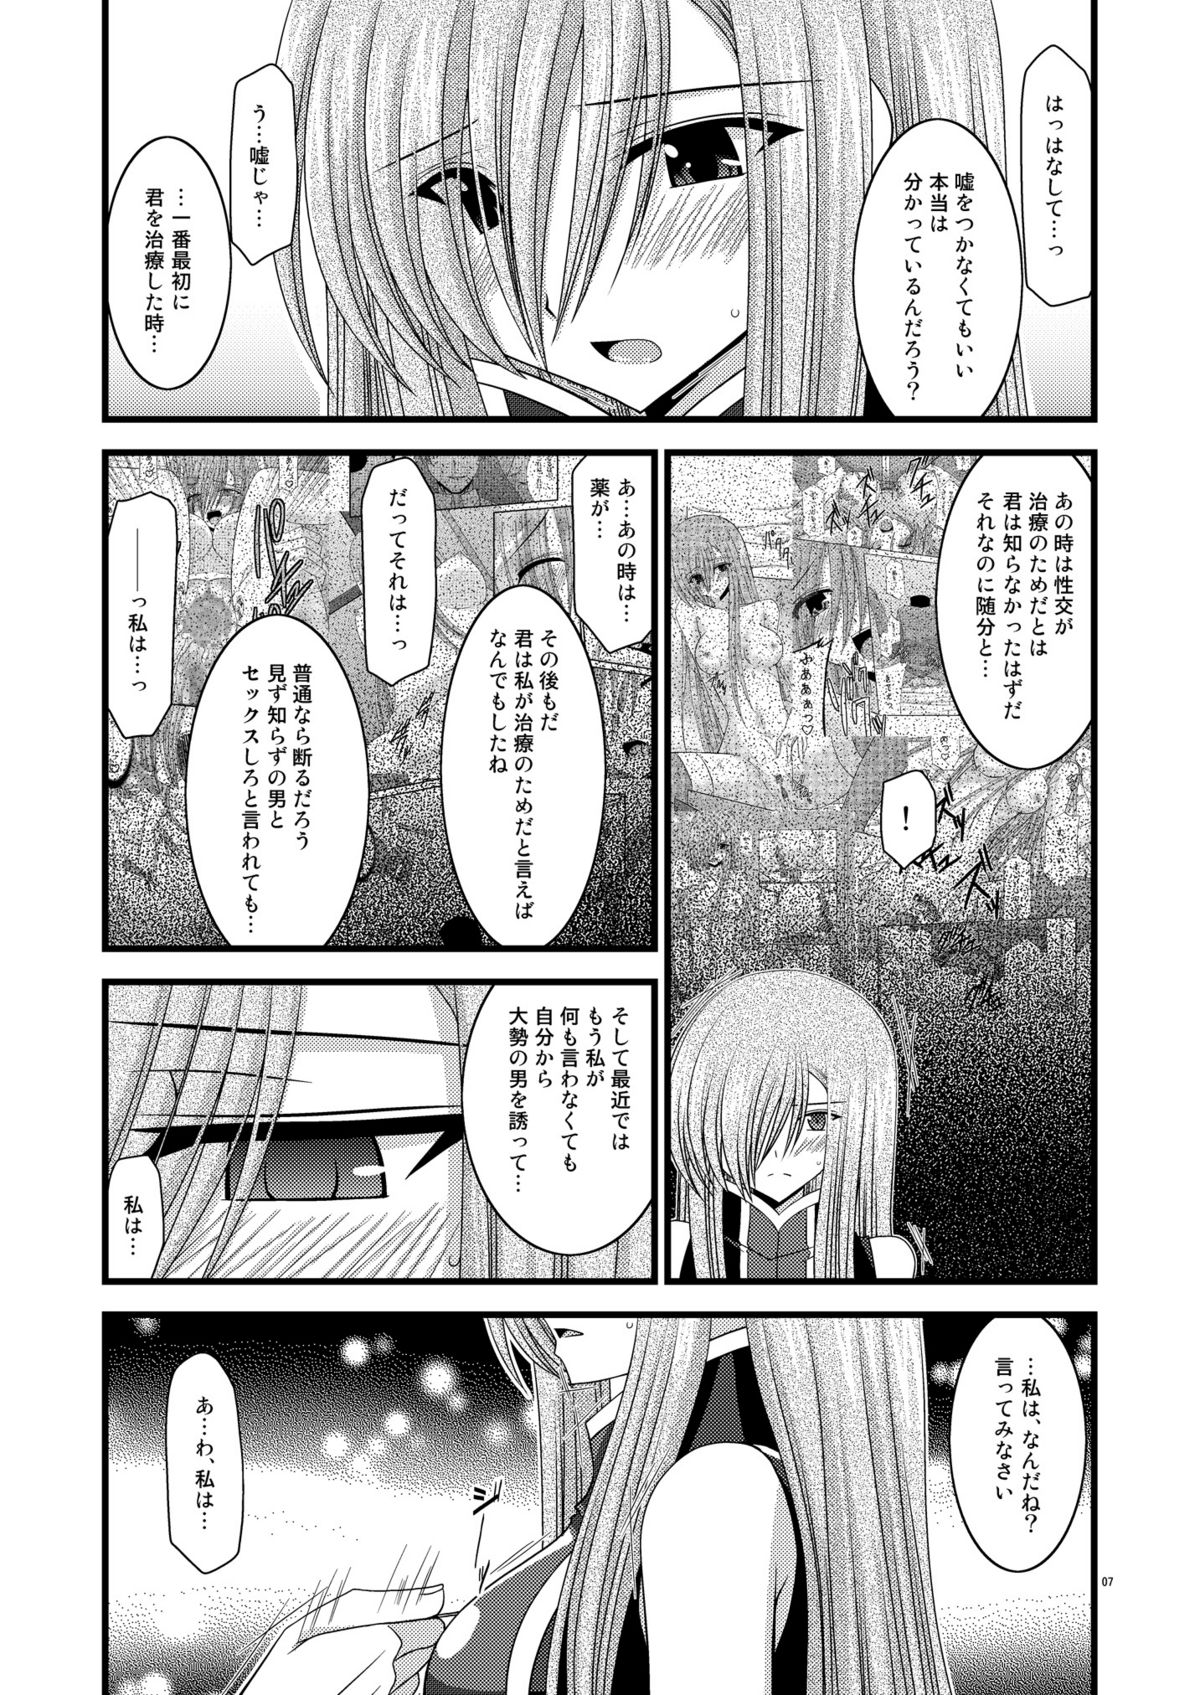 (SC41) [valssu] Melon Niku Bittake! V -the last- (Tales of the Abyss) page 7 full